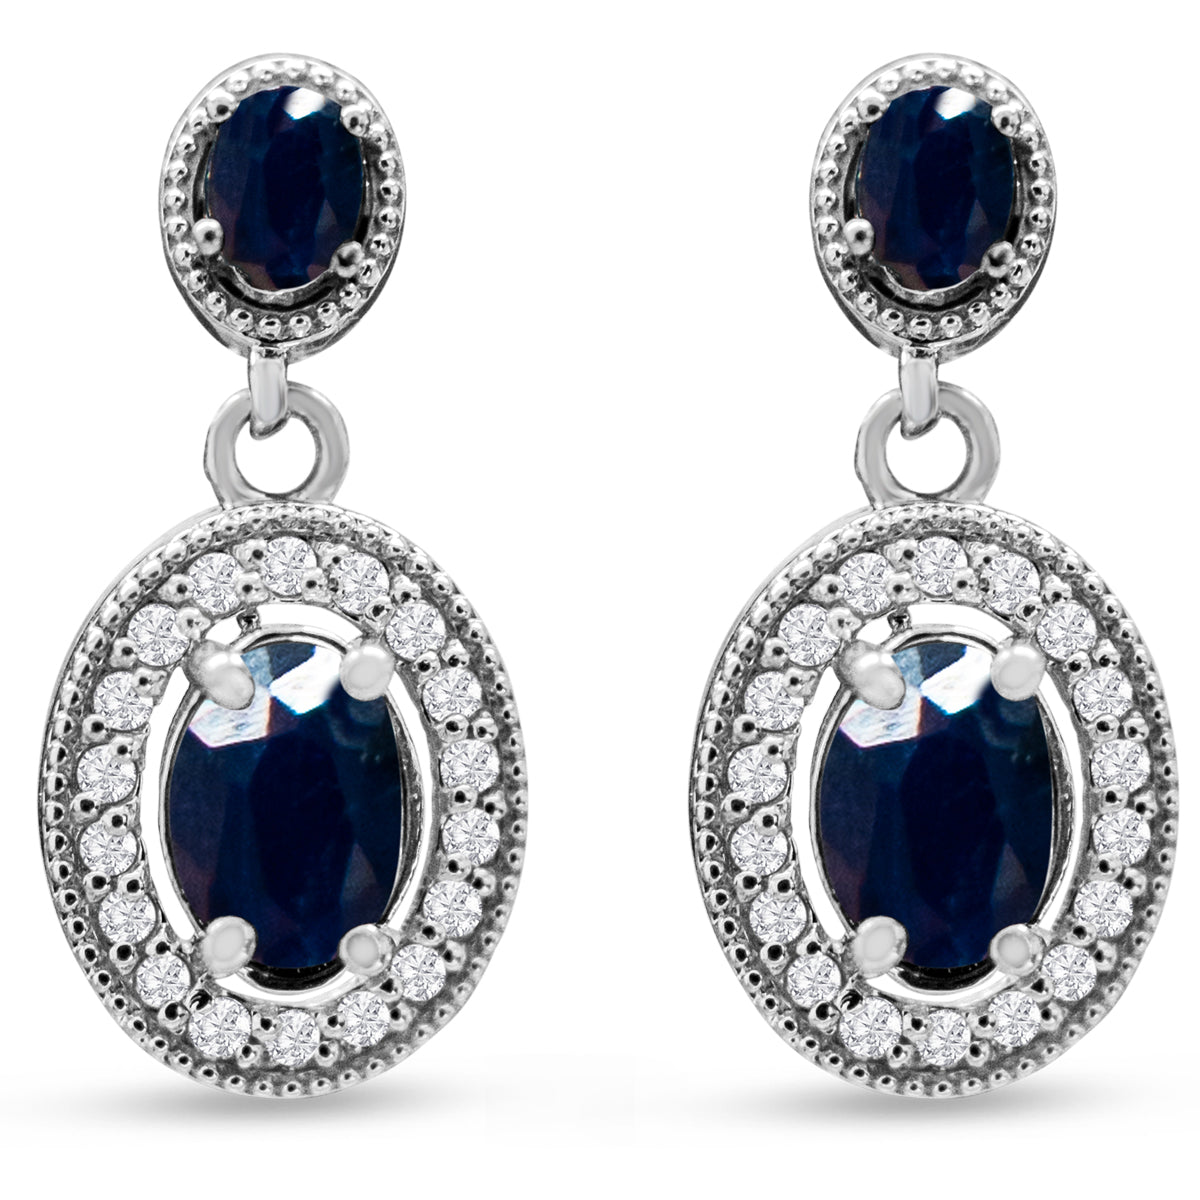 Sselects 2 Carat Sapphire And Diamond Drop Earrings In 14 Karat White I-j, I1-i2 In Gold